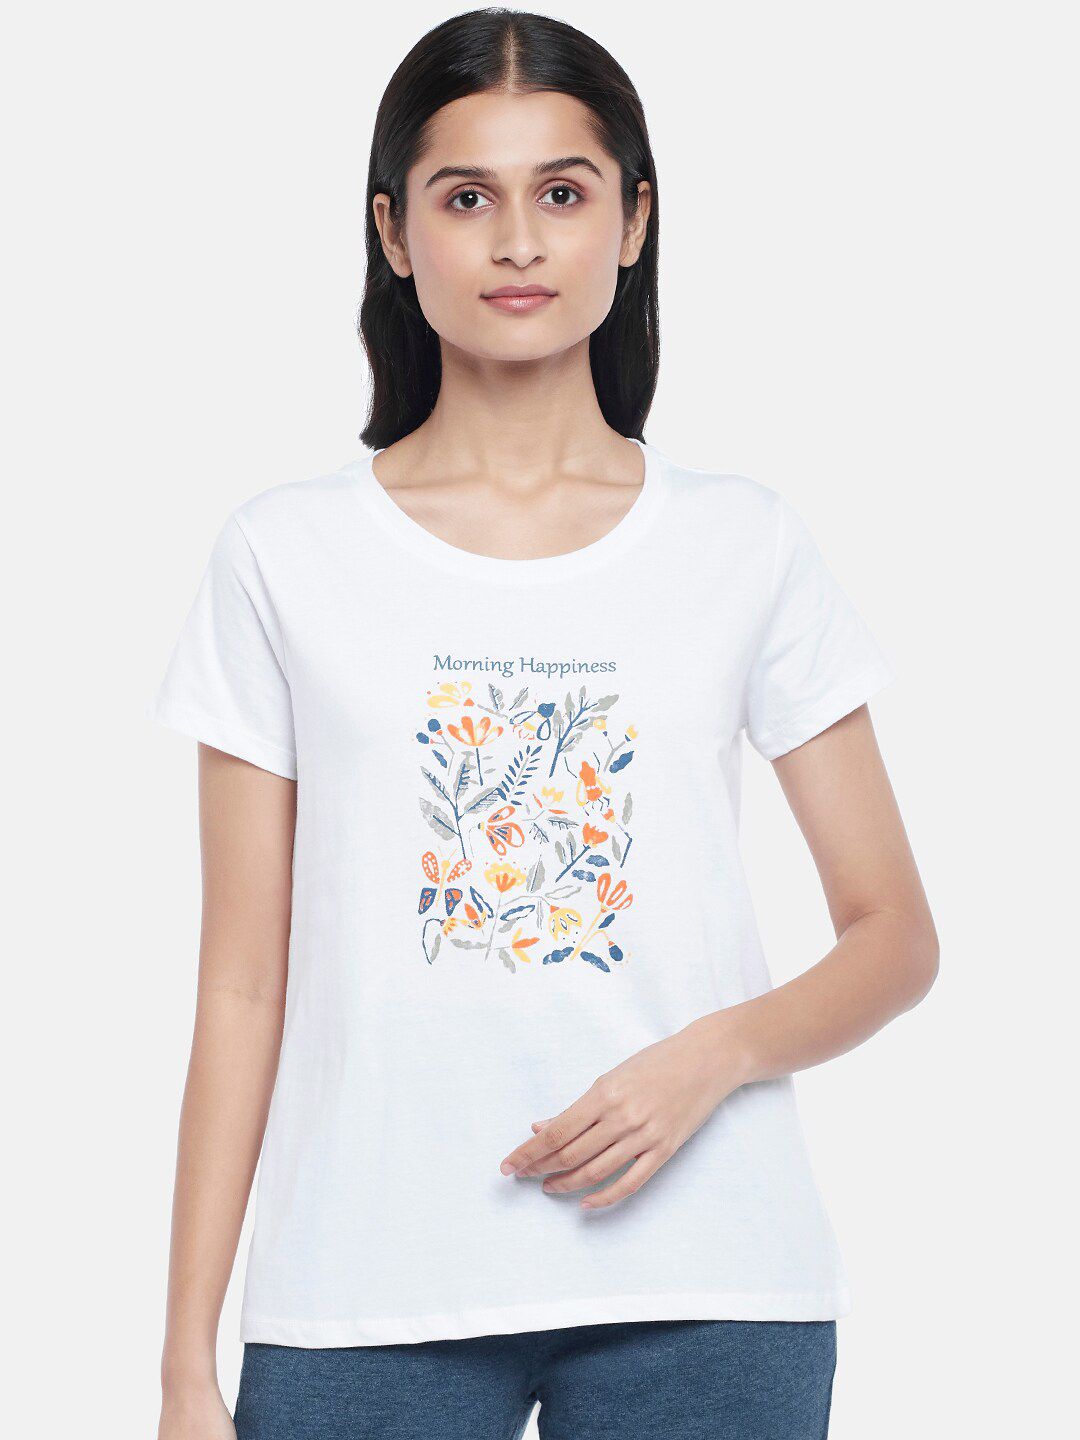 Dreamz by Pantaloons White Typography Printed Lounge tshirt Price in India